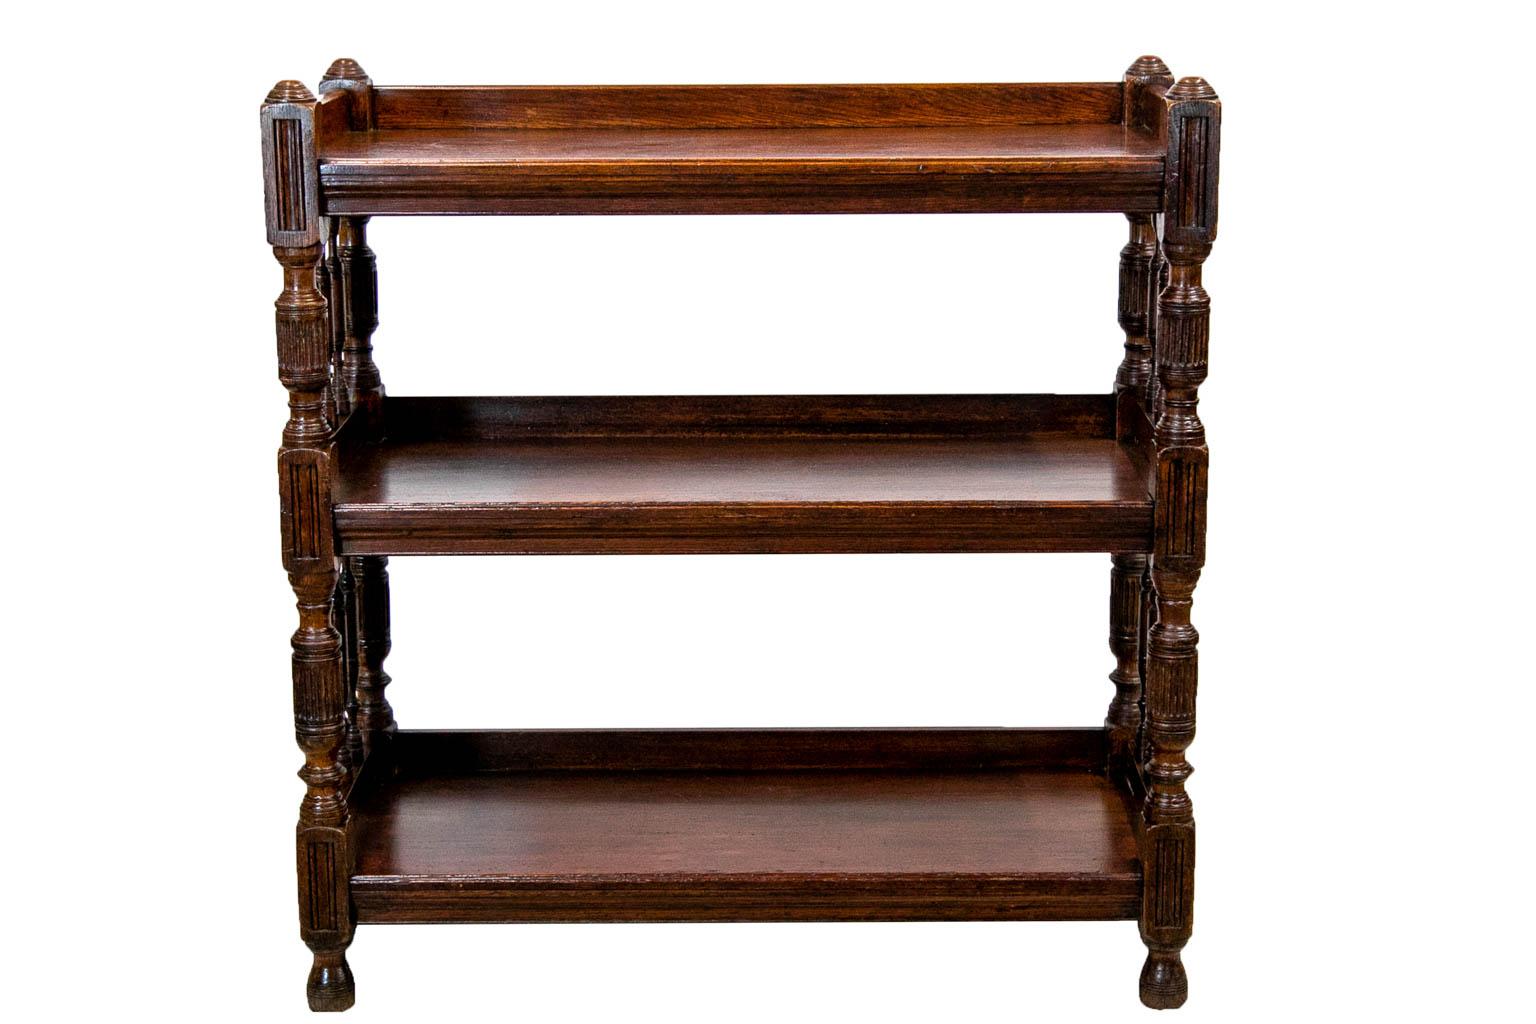 All three shelves of this tiered server have a gallery on three sides. The sides are elaborately carved with fluted hand molded panels and fluted support columns with six turned decorative spindles on each side.